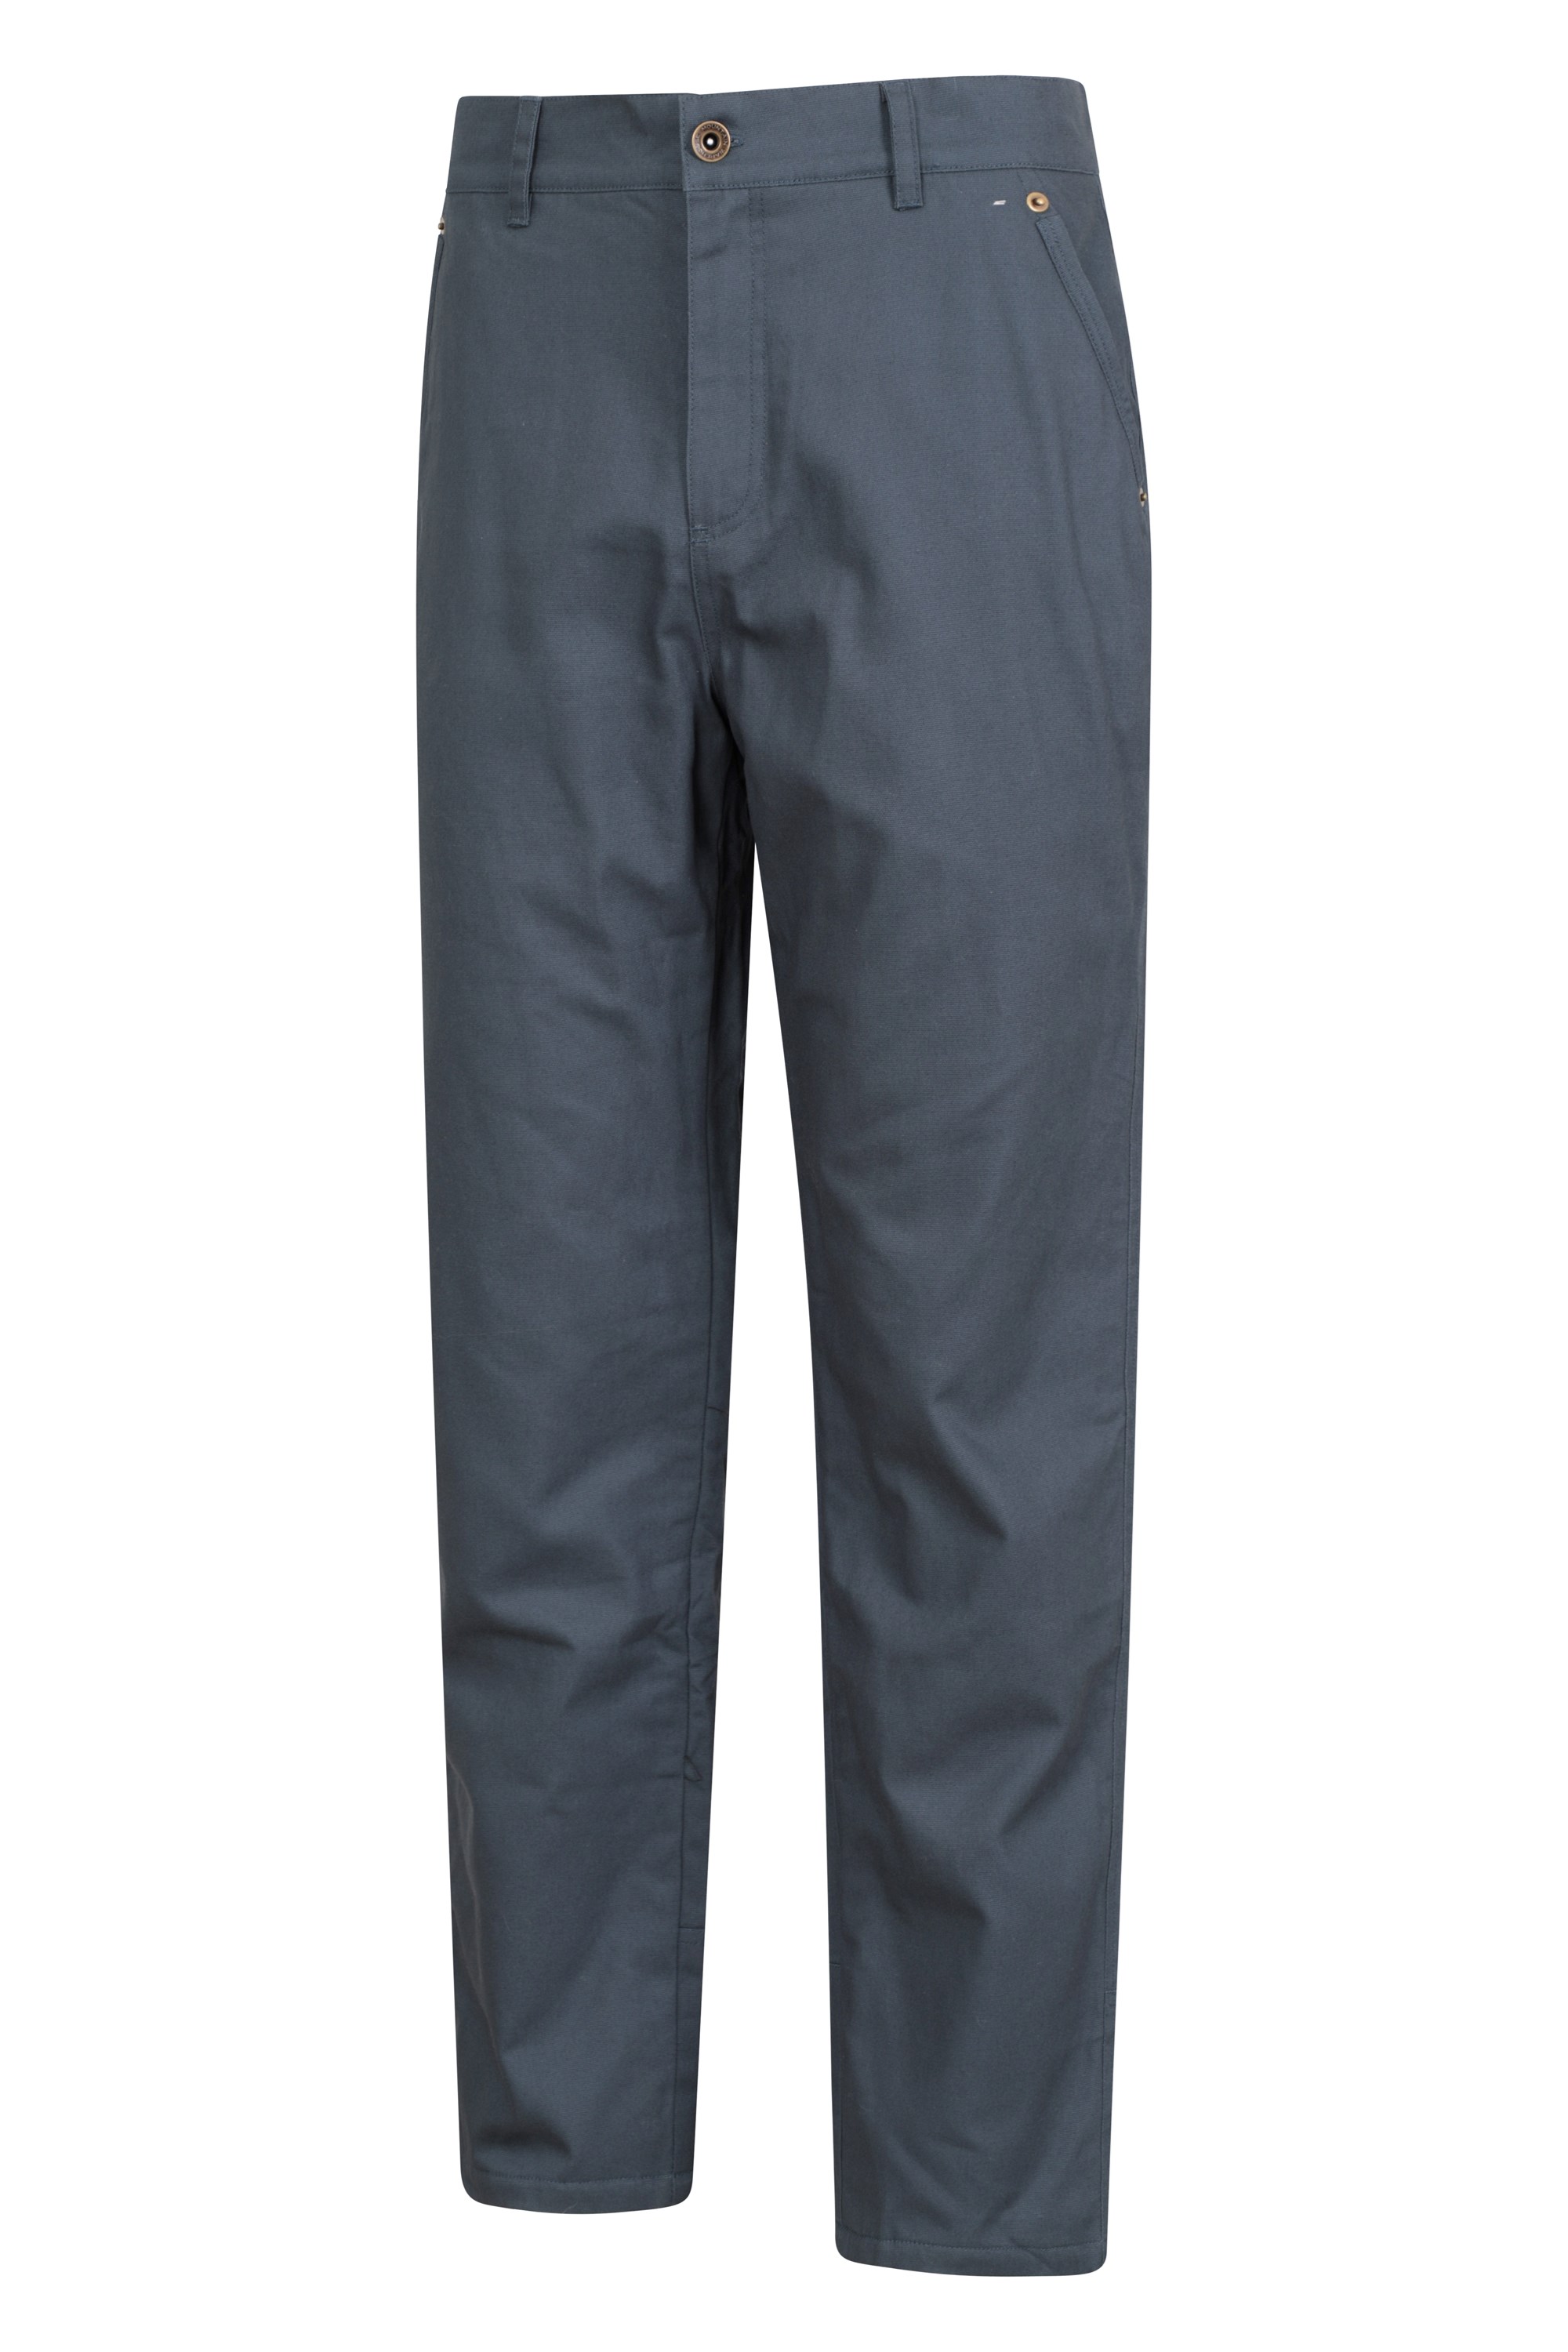 Mens Fleece Lined Dress Pants Windproof Insulated Plain-Front